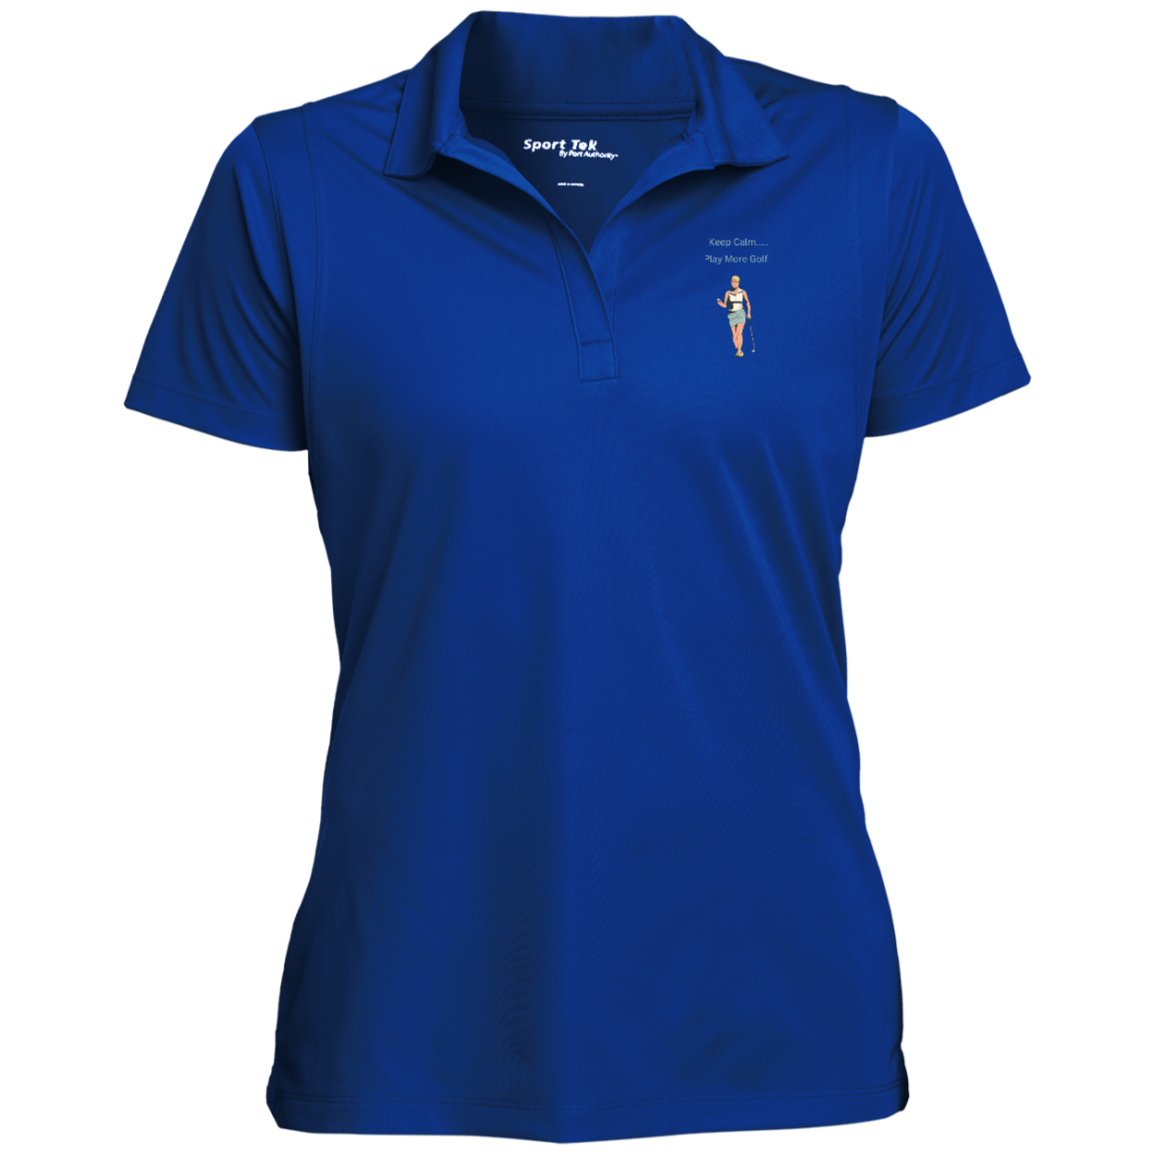 Roo$ter Brand Ladies' Micropique Sport-Wick® Polo Be Calm